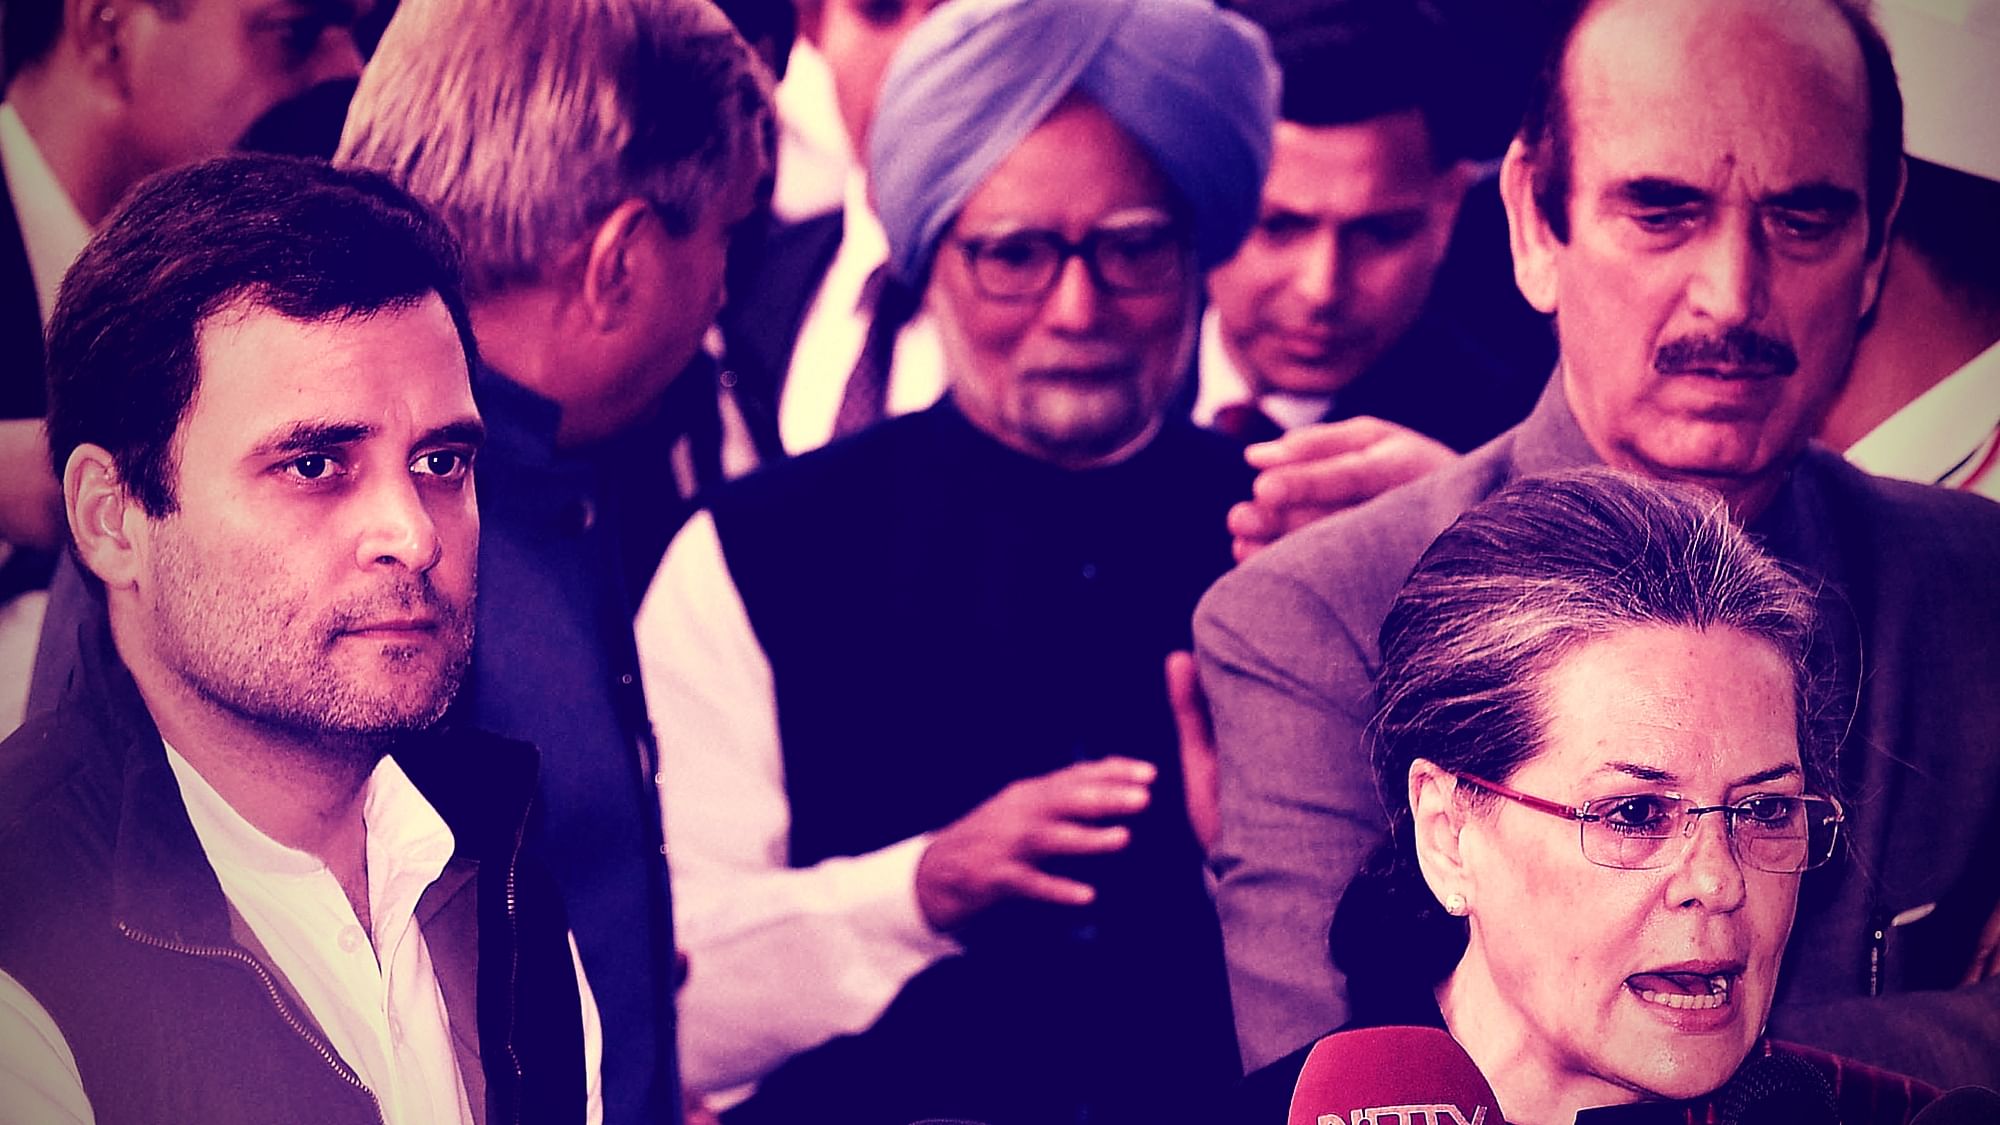 It’s unprecedented that former Prime Minister Manmohan Singh stood surety for Sonia Gandhi, who along with the other accused would face marathon proceedings from February 20, 2016. (Photo: PTI/Altered by The Quint)